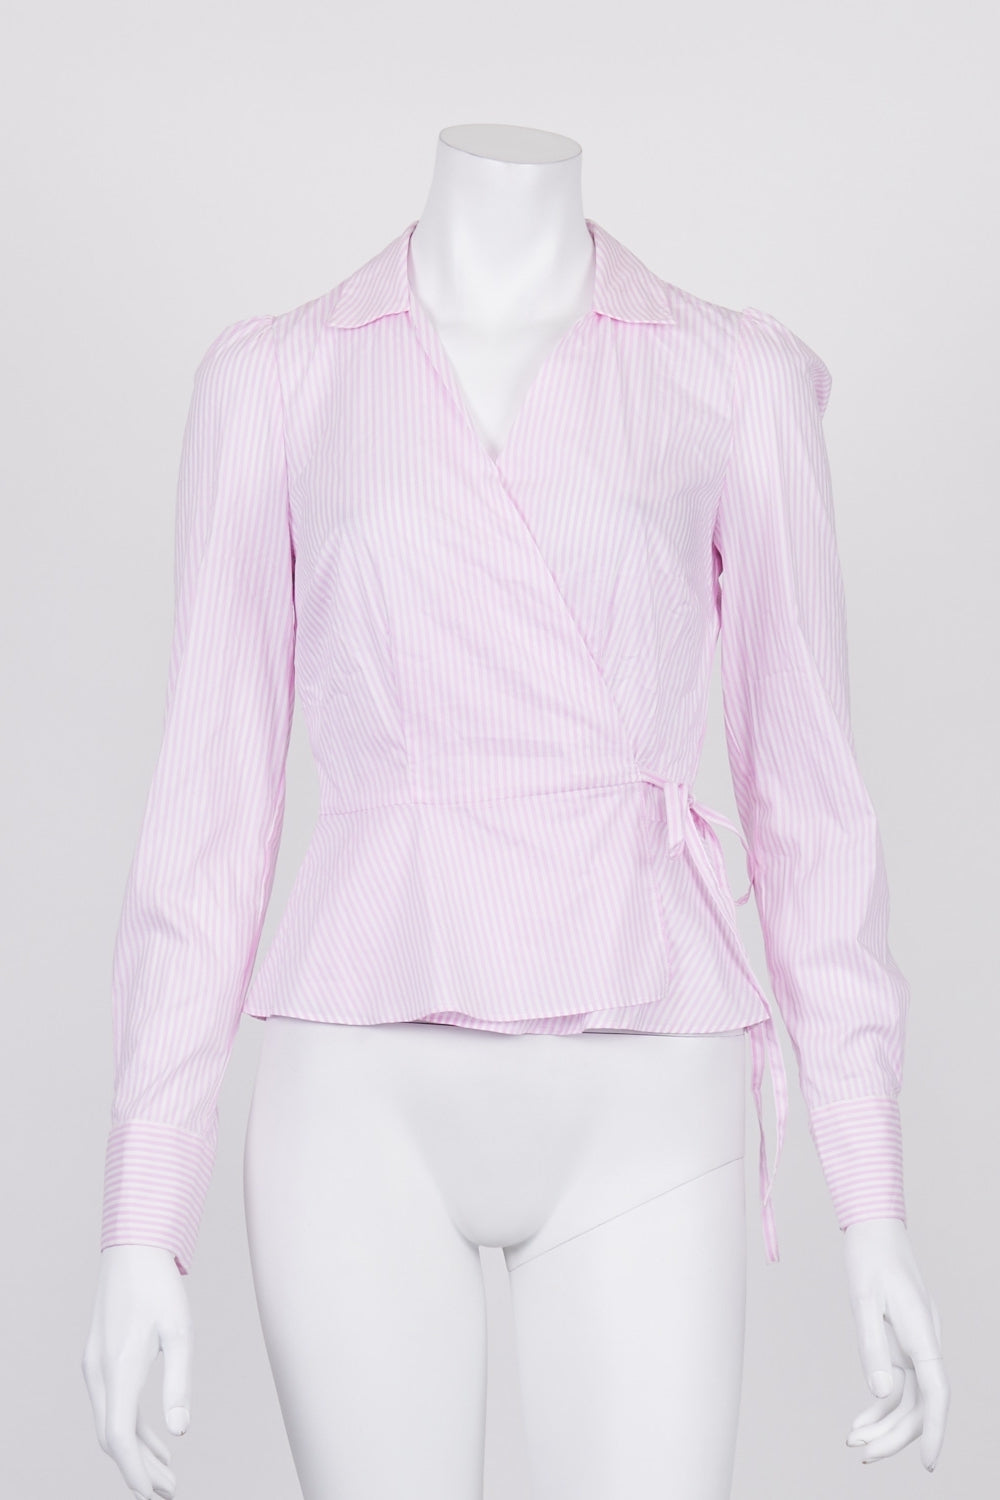 Portmans Pink And White Striped Wrap Top 6